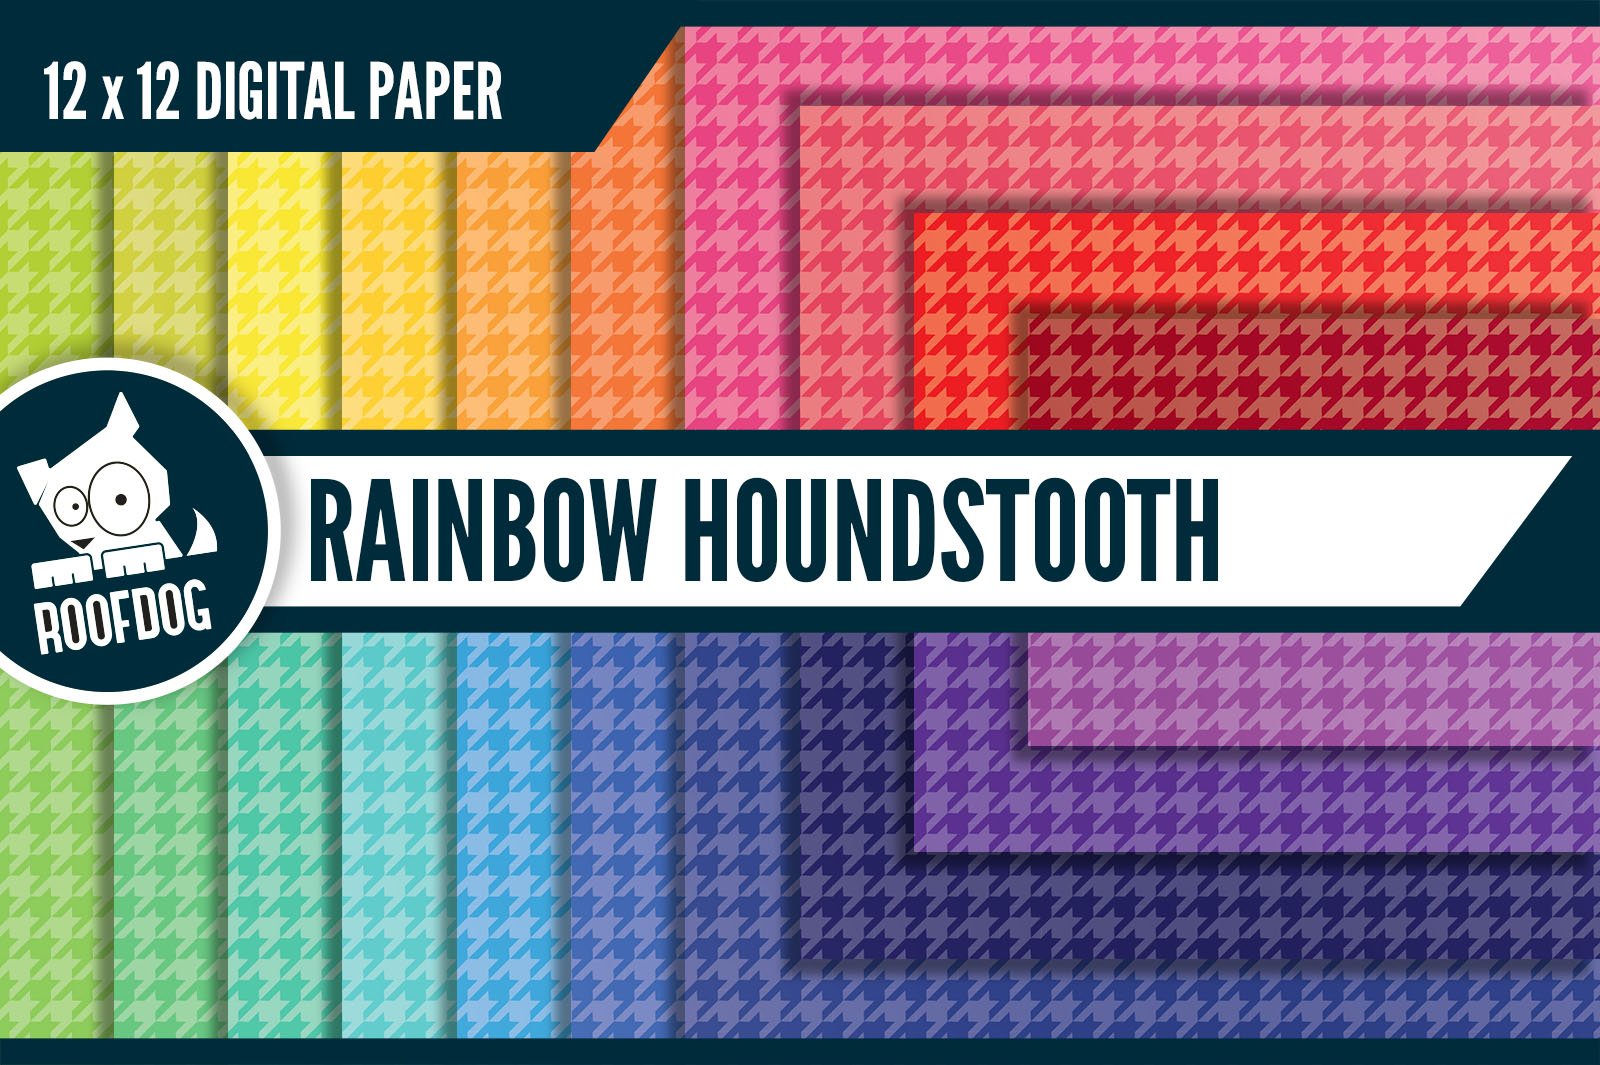 Rainbow houndstooth digital paper cover image.